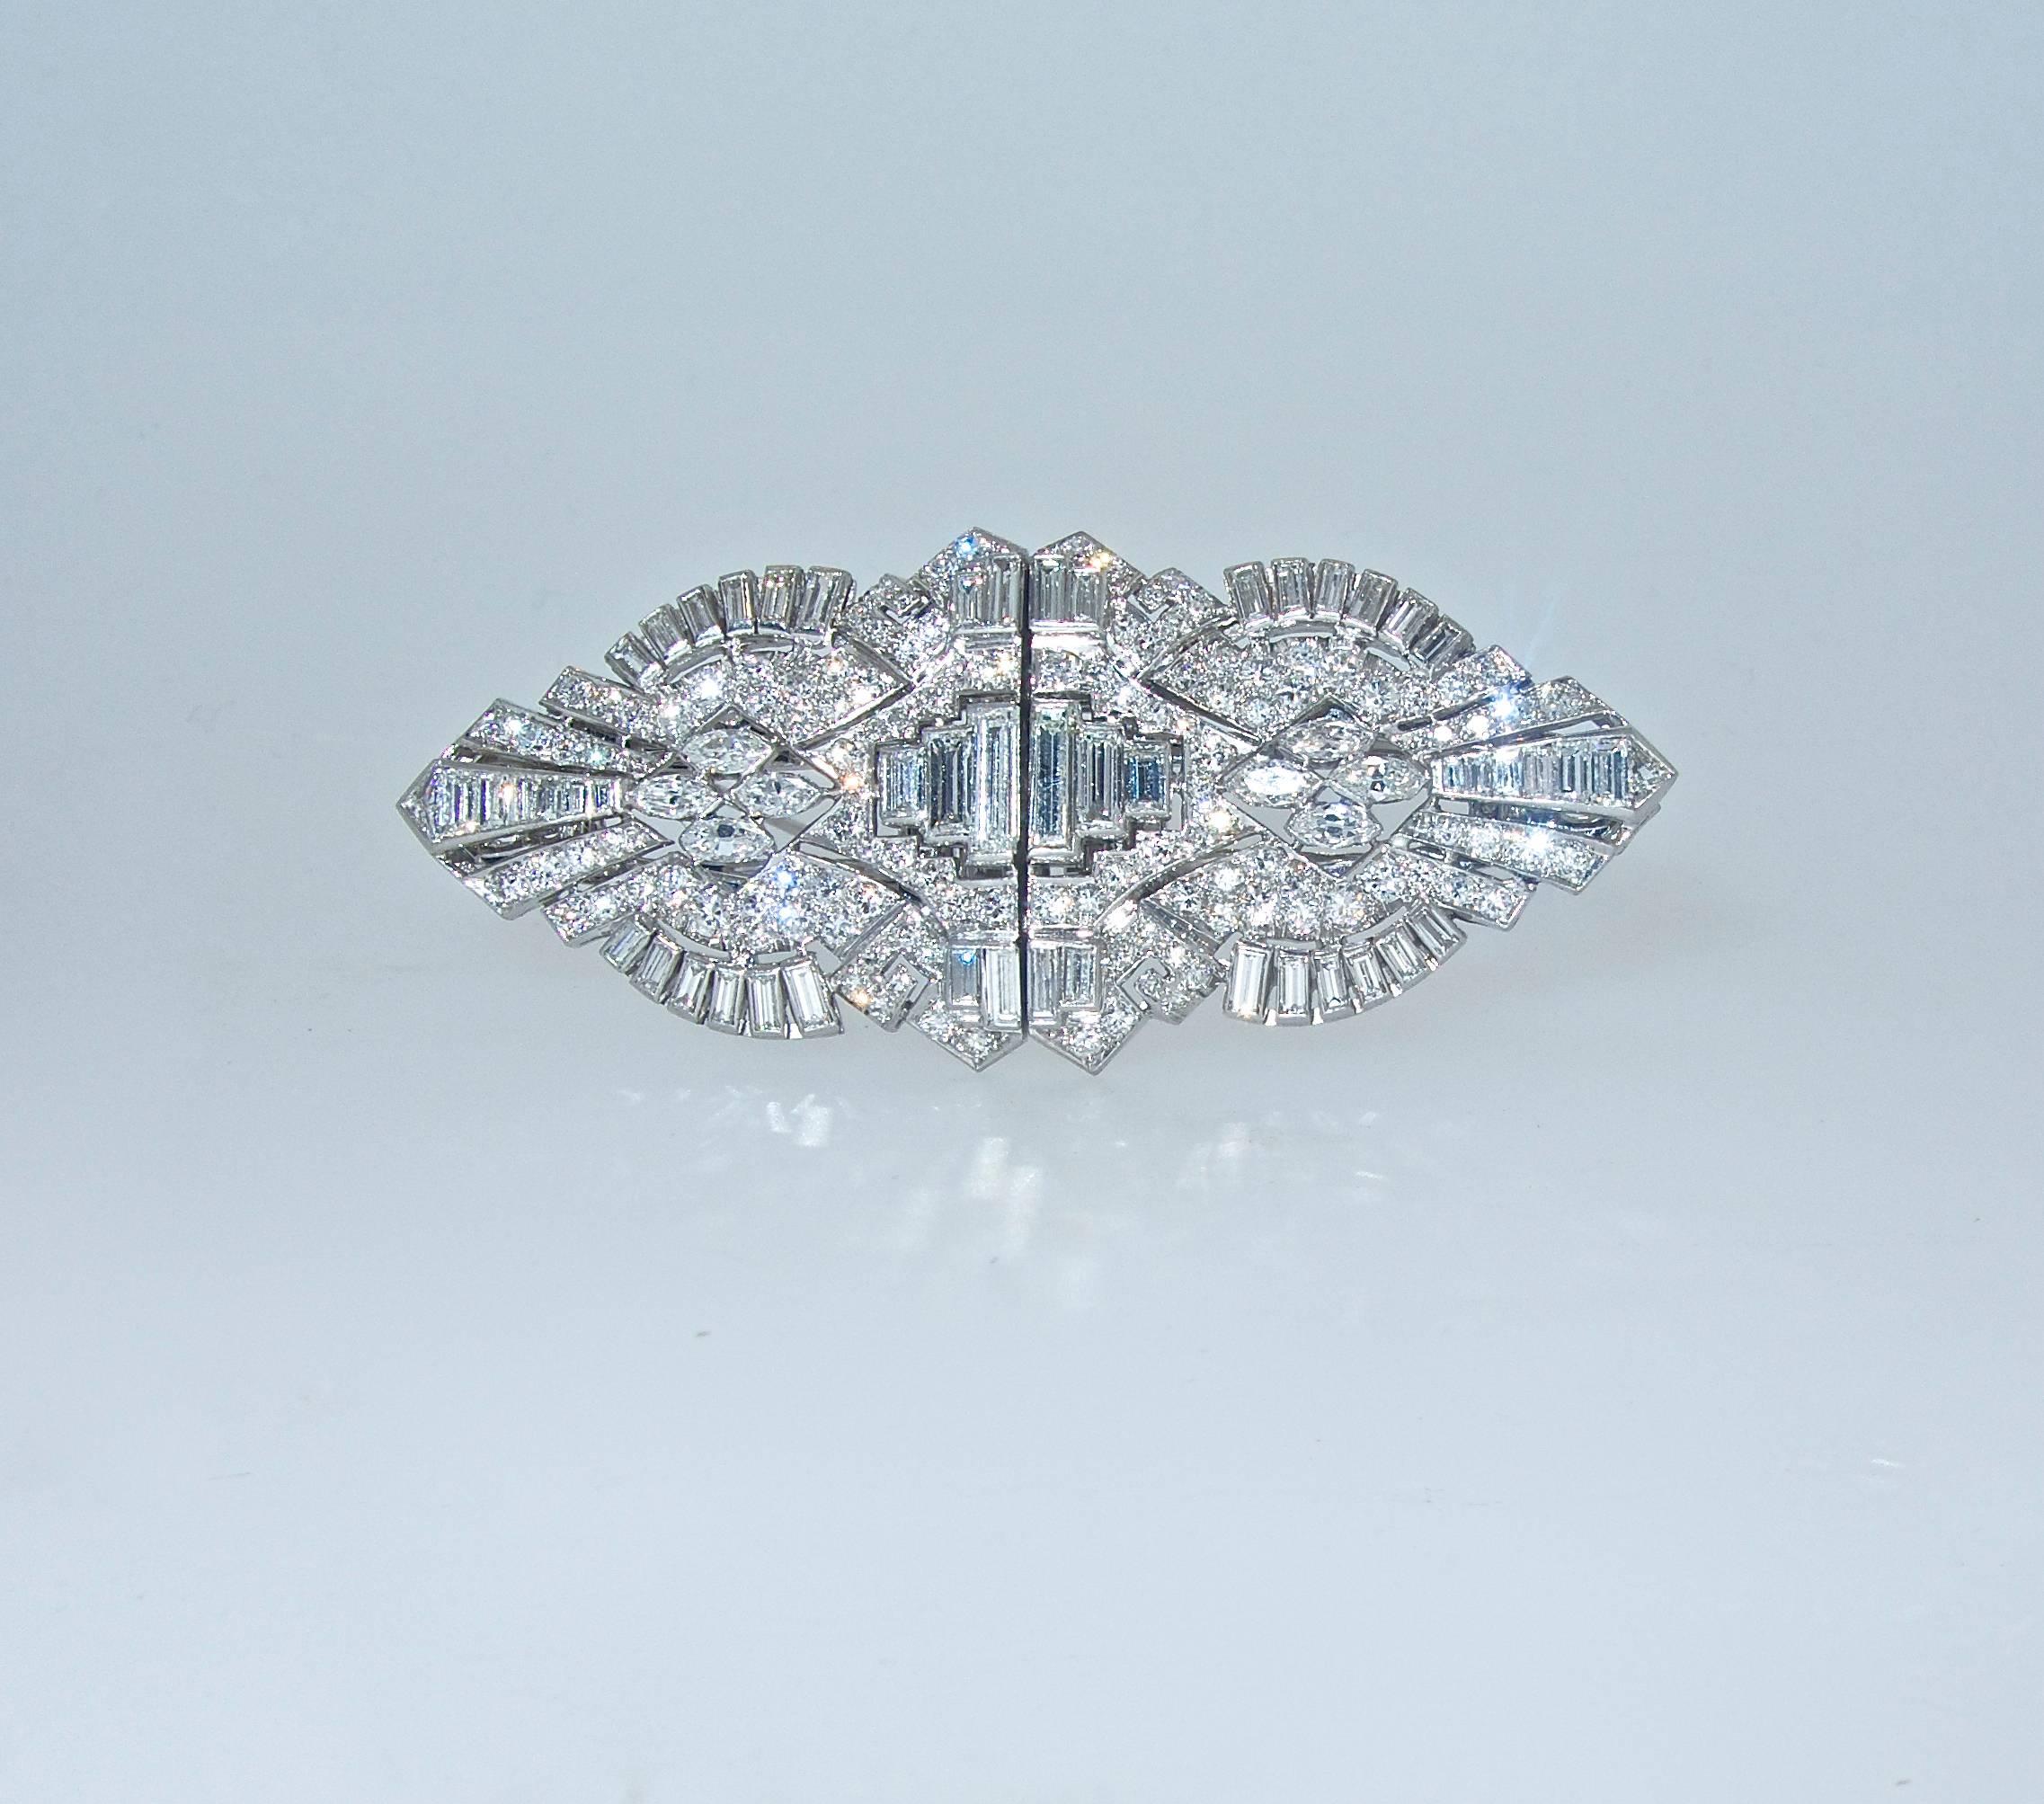 This platinum period piece can be worn as two clips or it fits together with a 3rd element stabilizing it as one brooch.  It is 2.5 inches in length and just over 1 inch high.  There are approximately 4.7 cts. of fine diamonds - marquis cut,